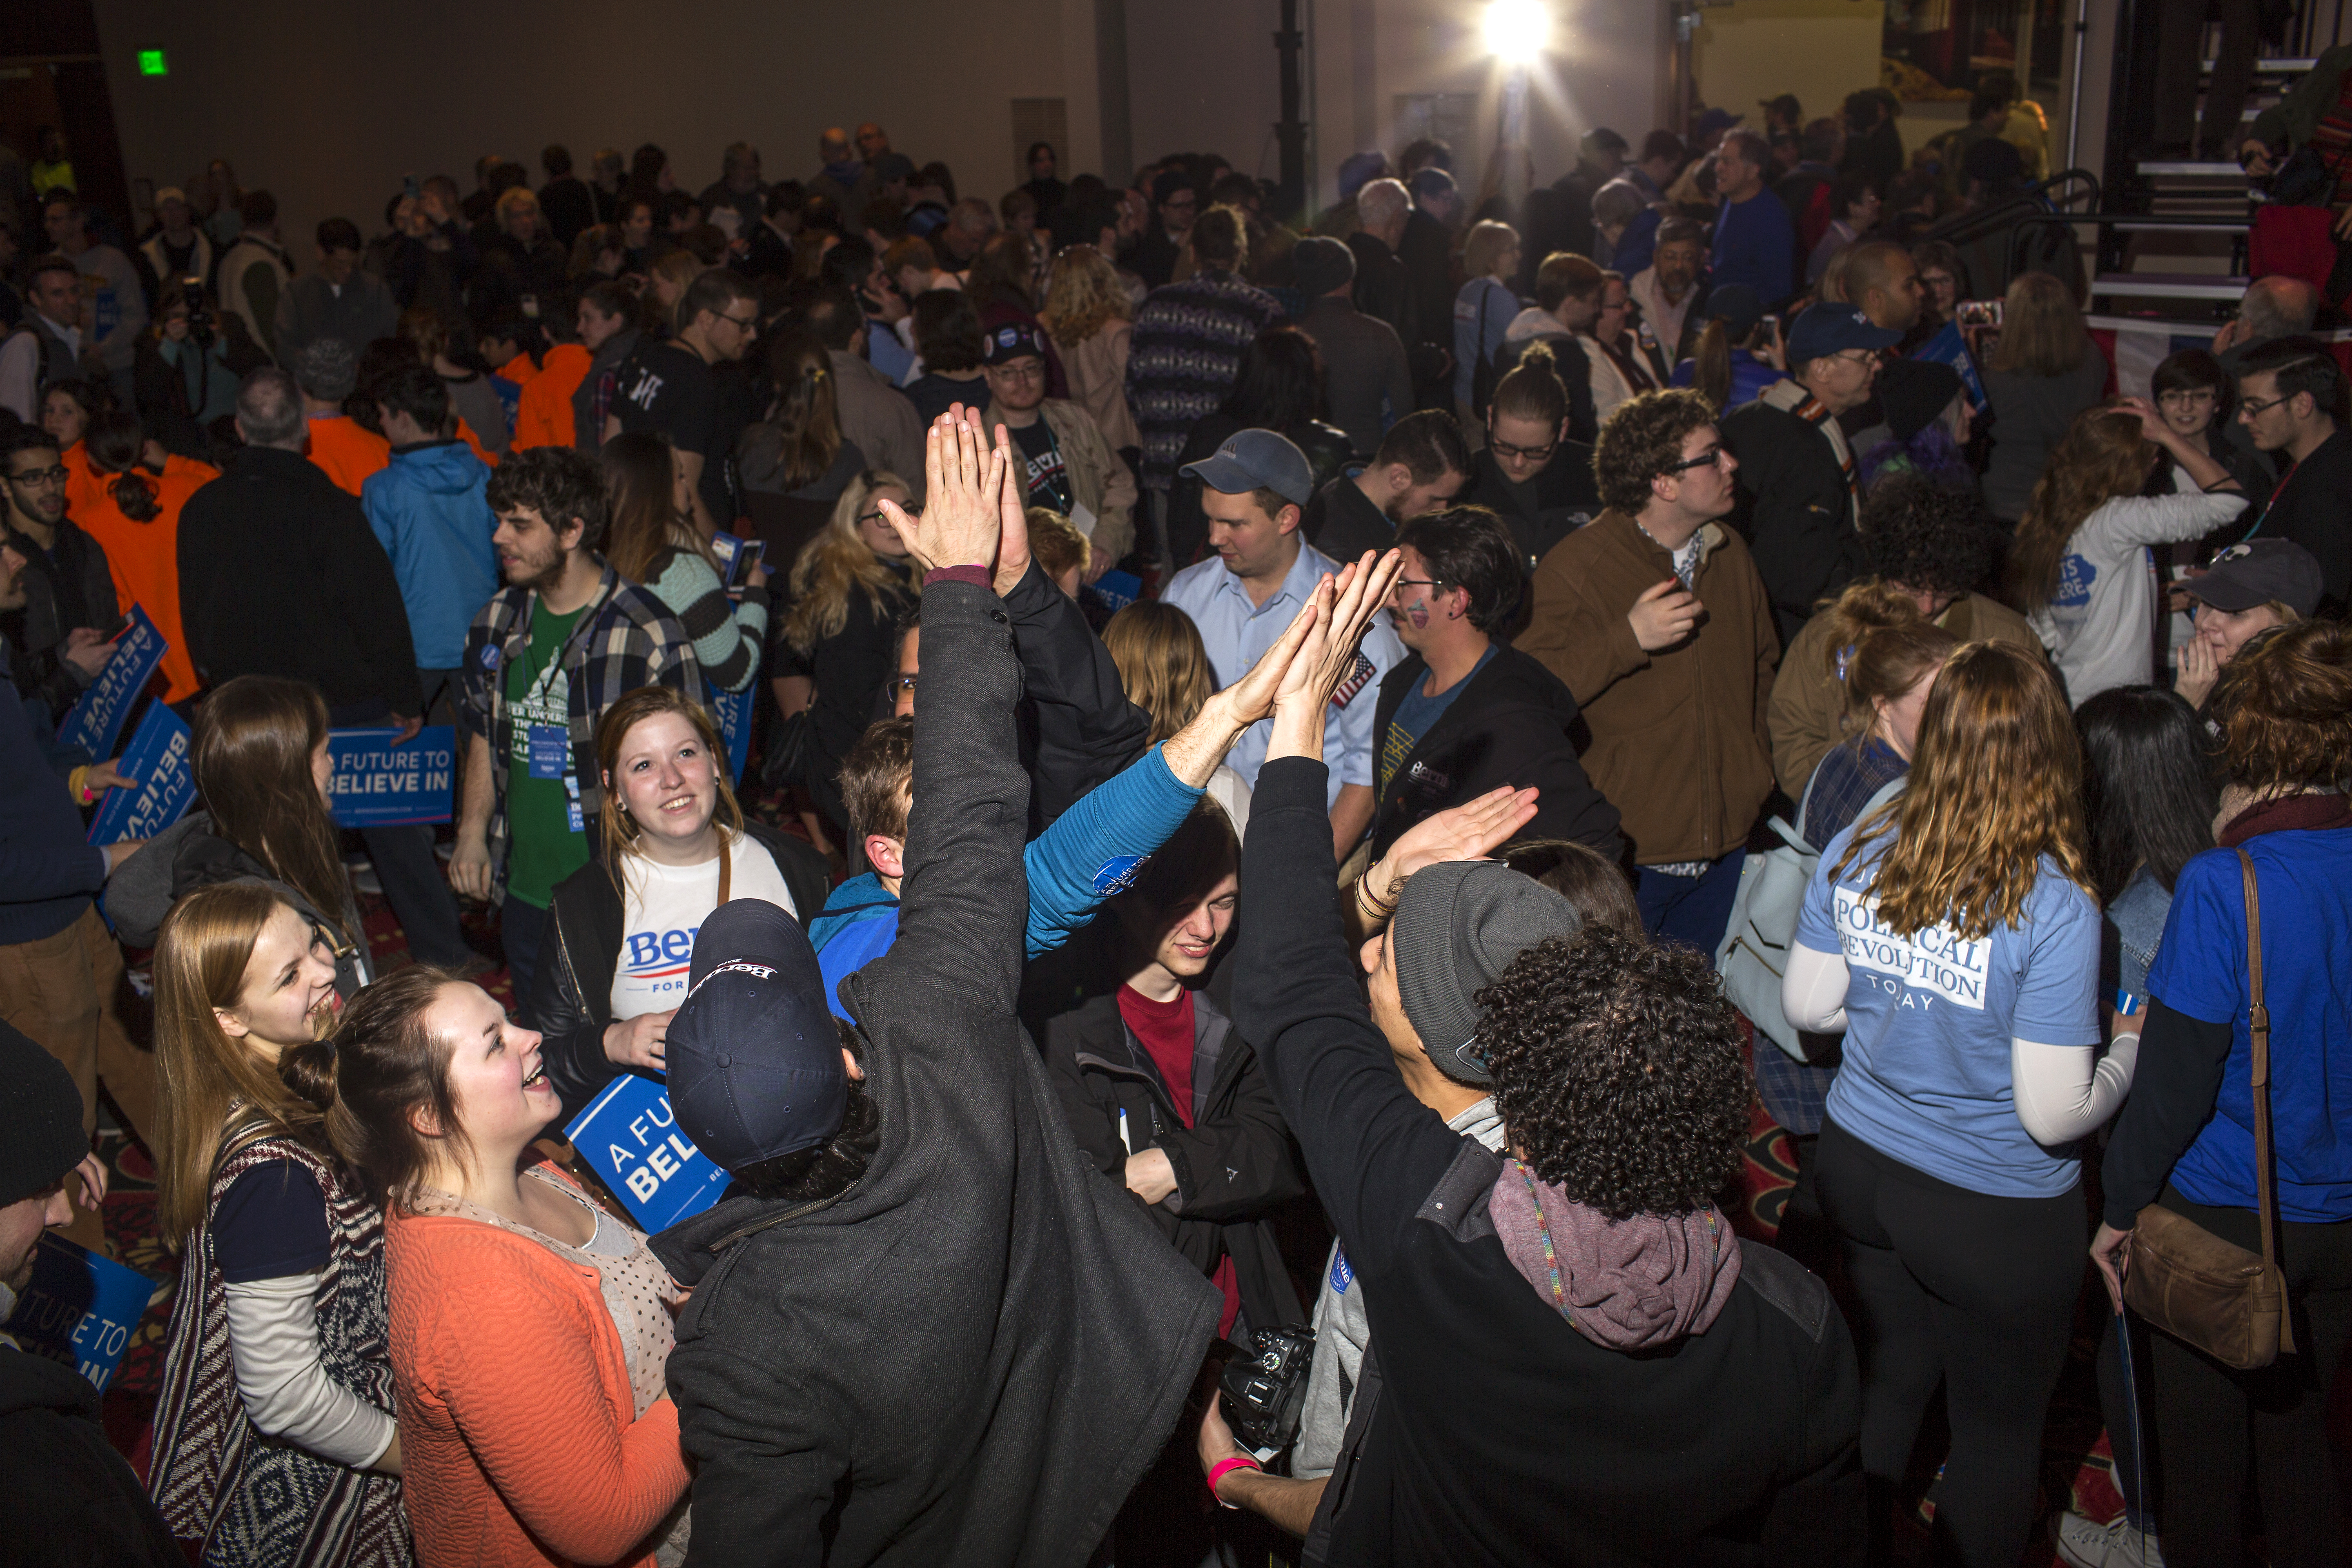 Supporters cheer for Vermont Sen. Bernie Sanders on caucus night in during a rally in Des Moines, Iowa on Feb. 1, 2016.